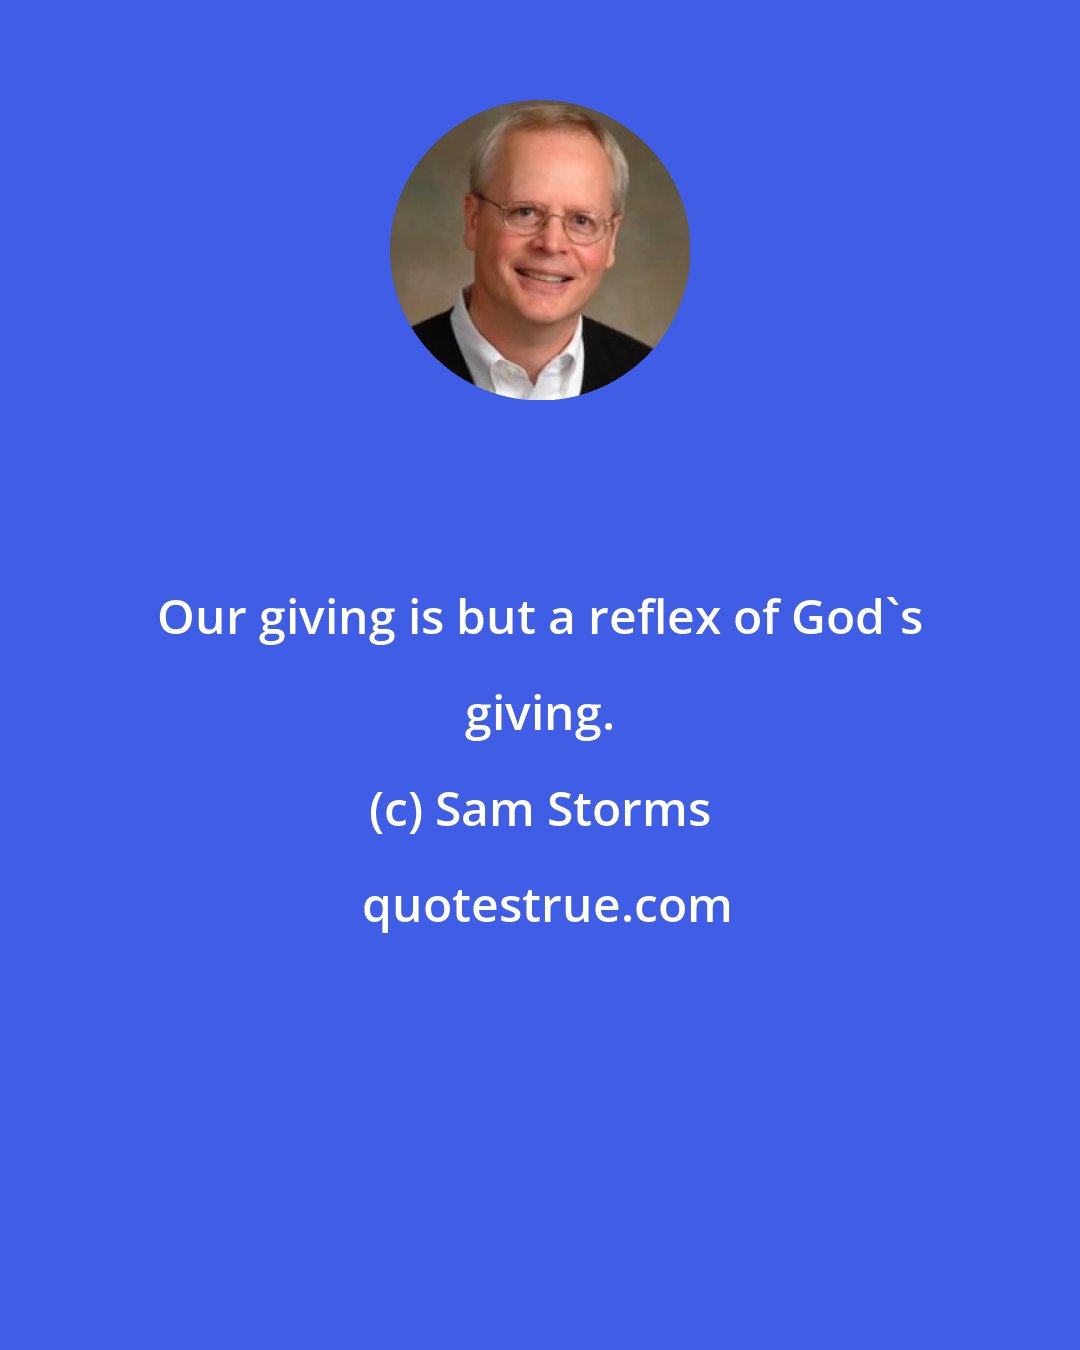 Sam Storms: Our giving is but a reflex of God's giving.